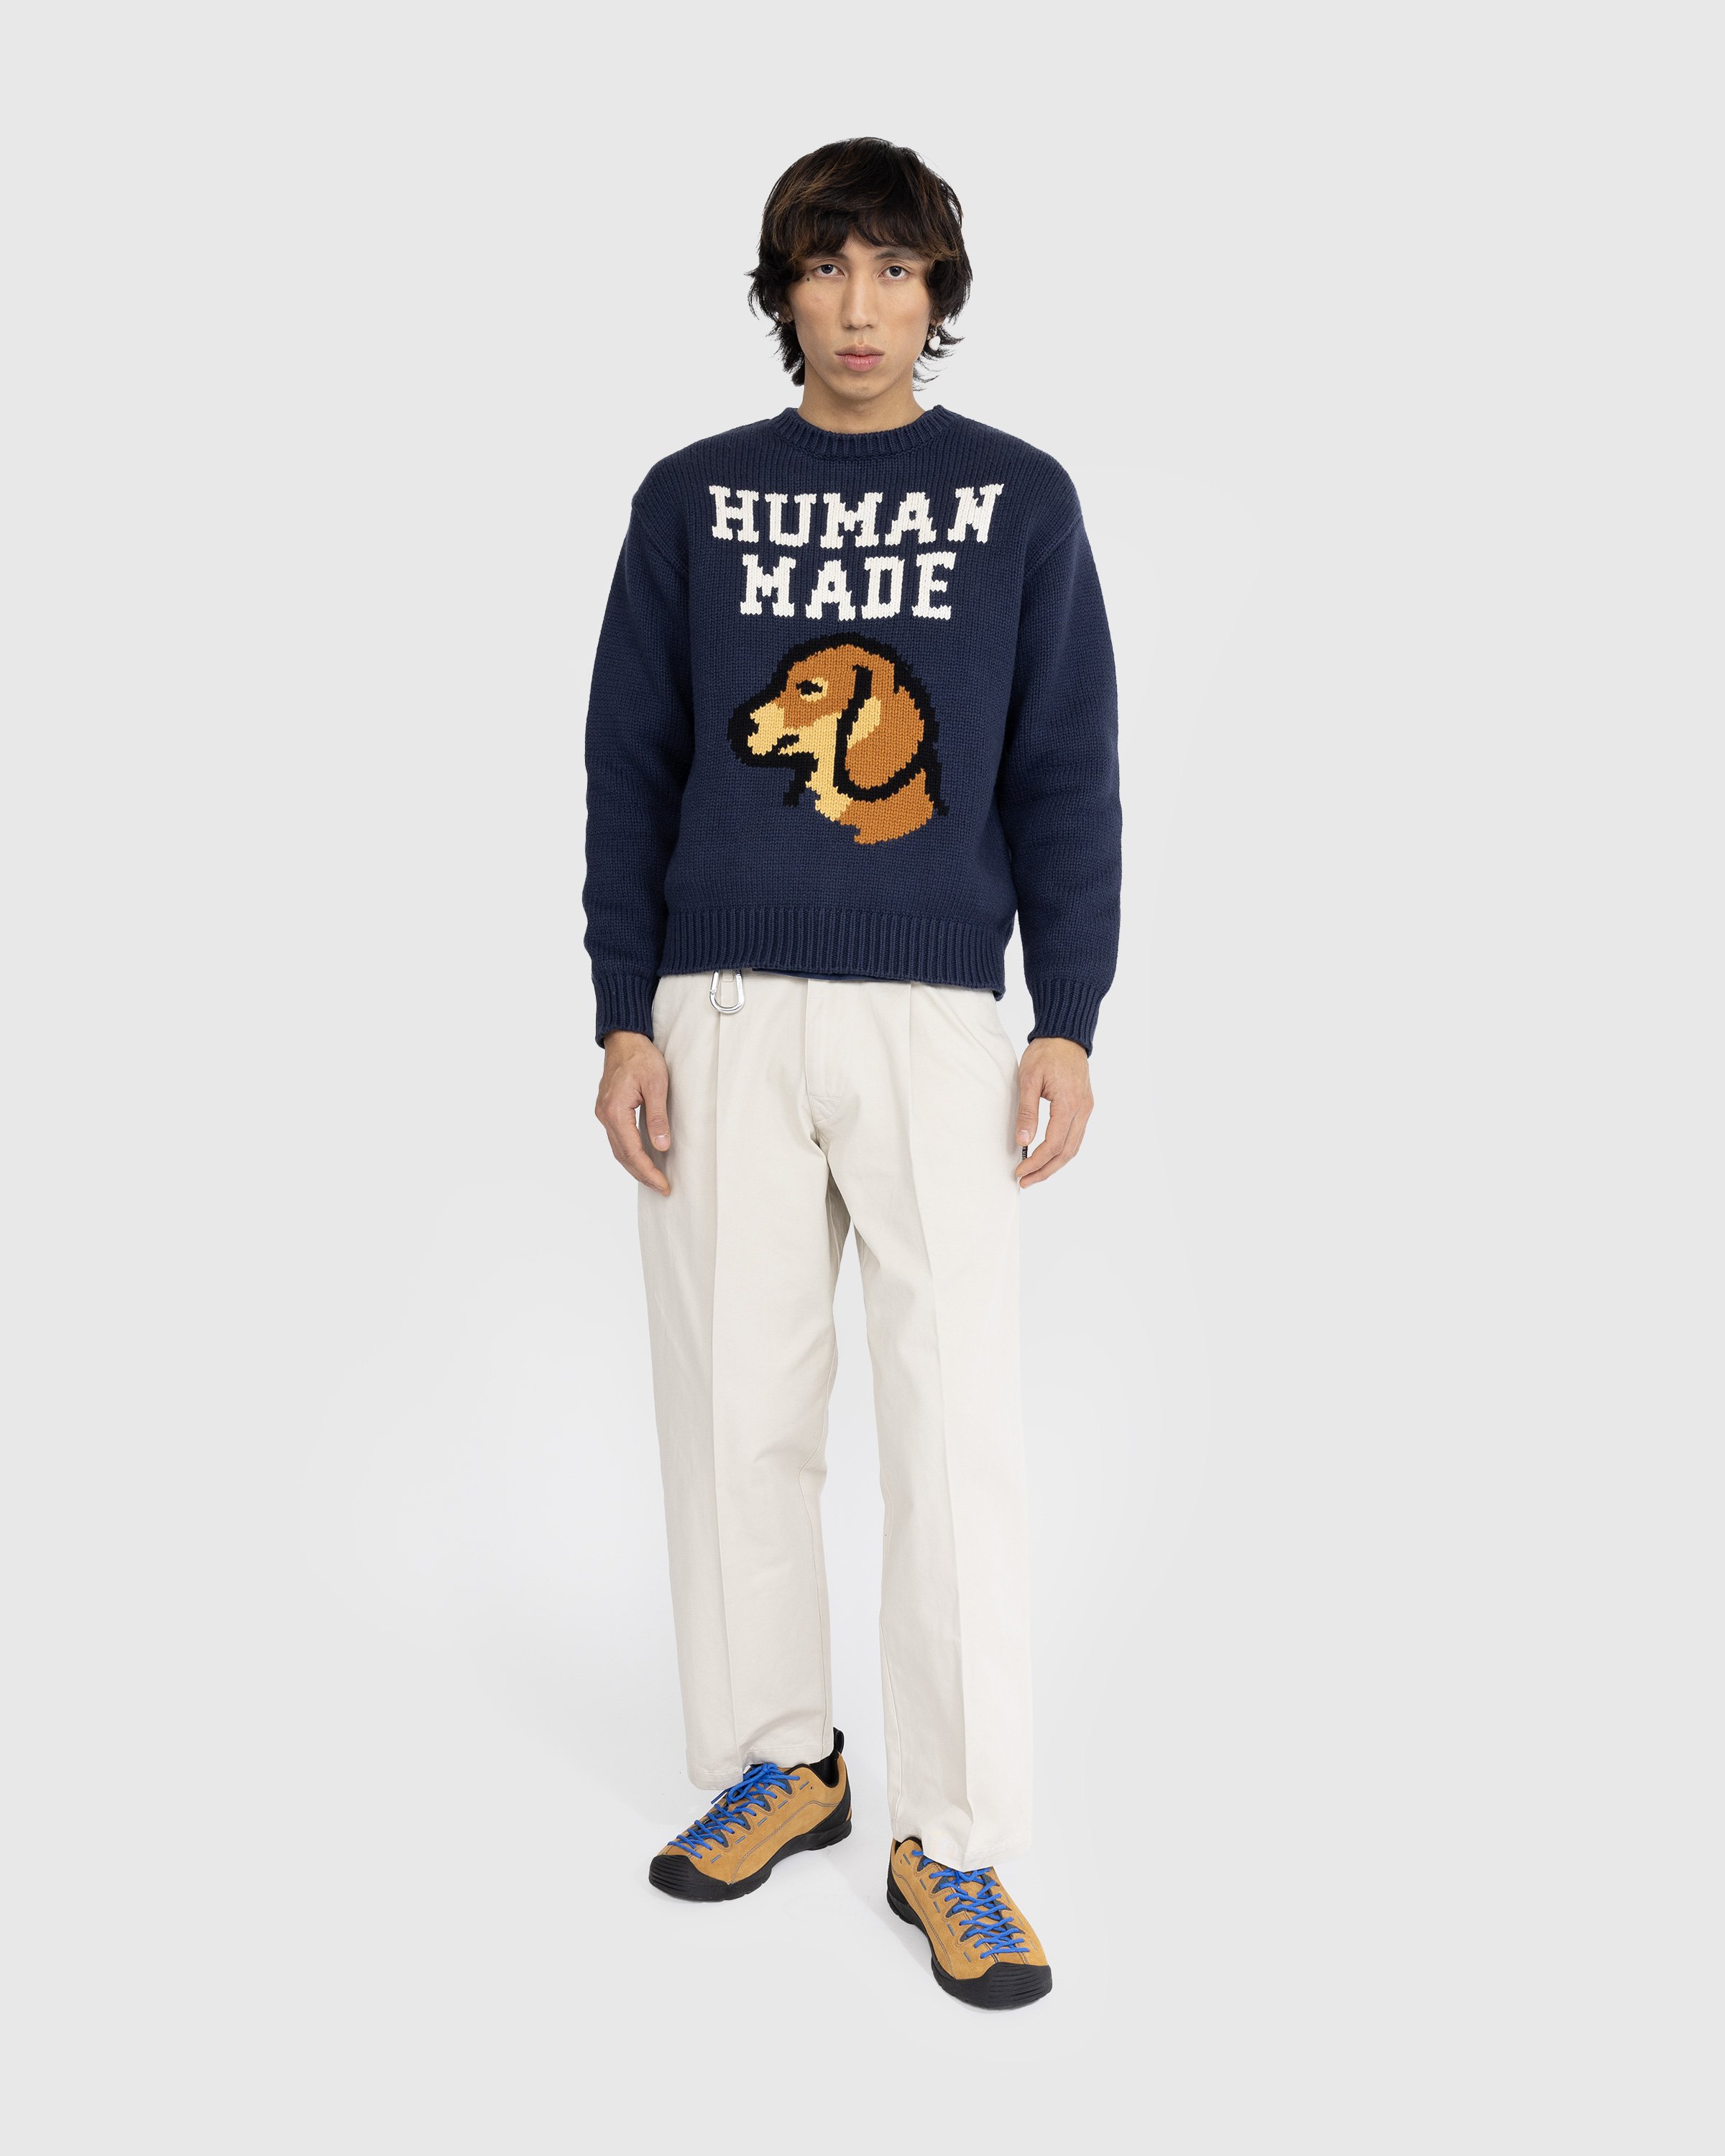 Human Made - Dachs Knit Sweater Navy - Clothing - Blue - Image 4